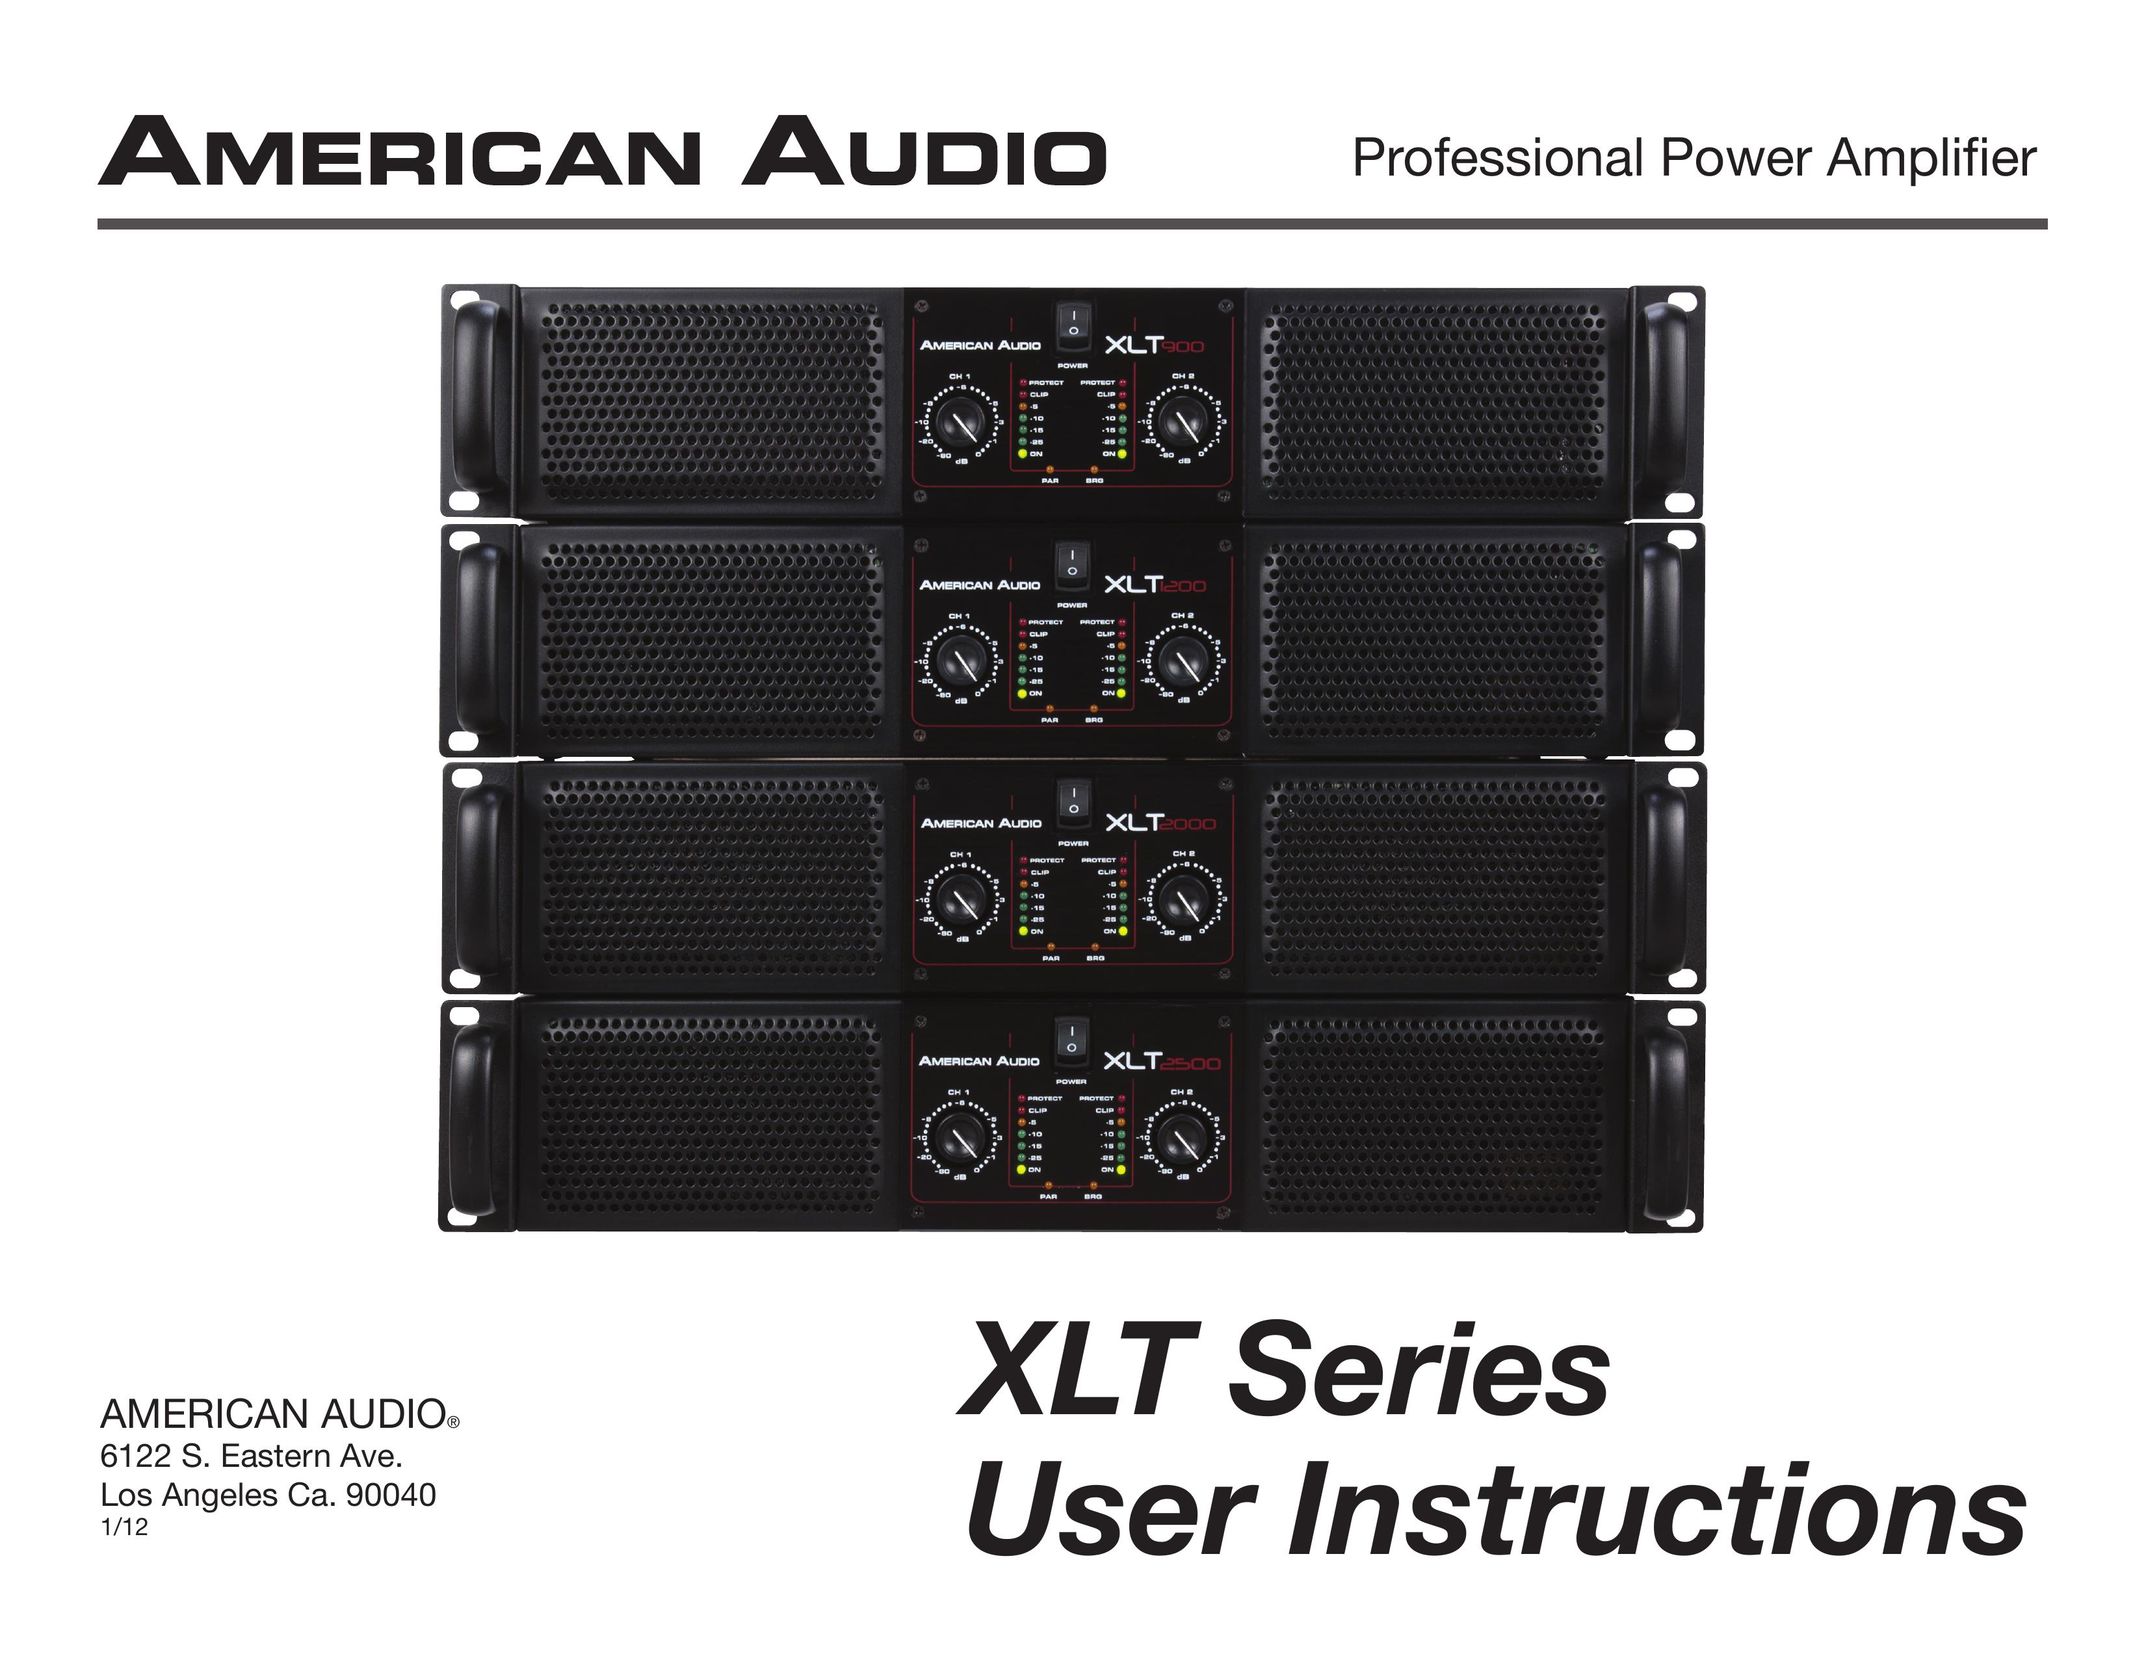 American Audio XLT2500 Stereo Amplifier User Manual